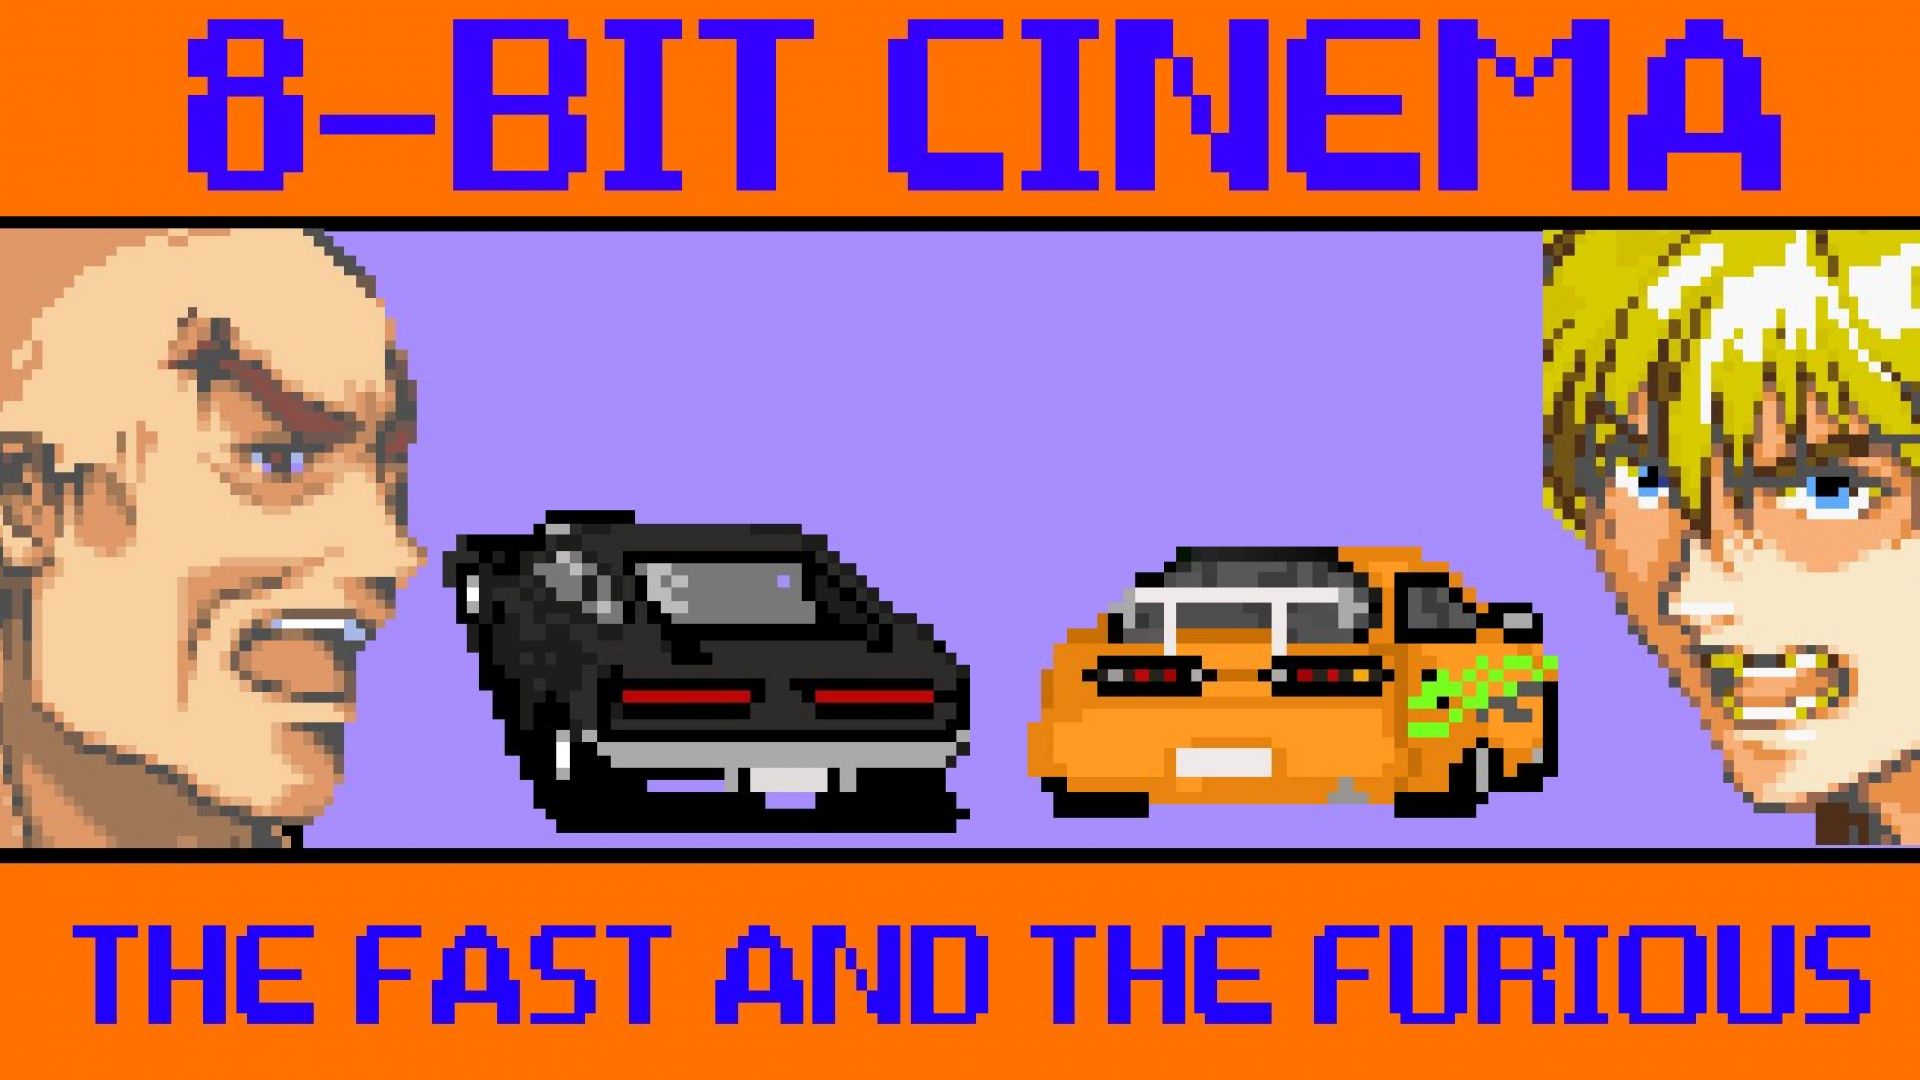 8-Bit Cinema present &#039;The Fast and the Furious&#039;